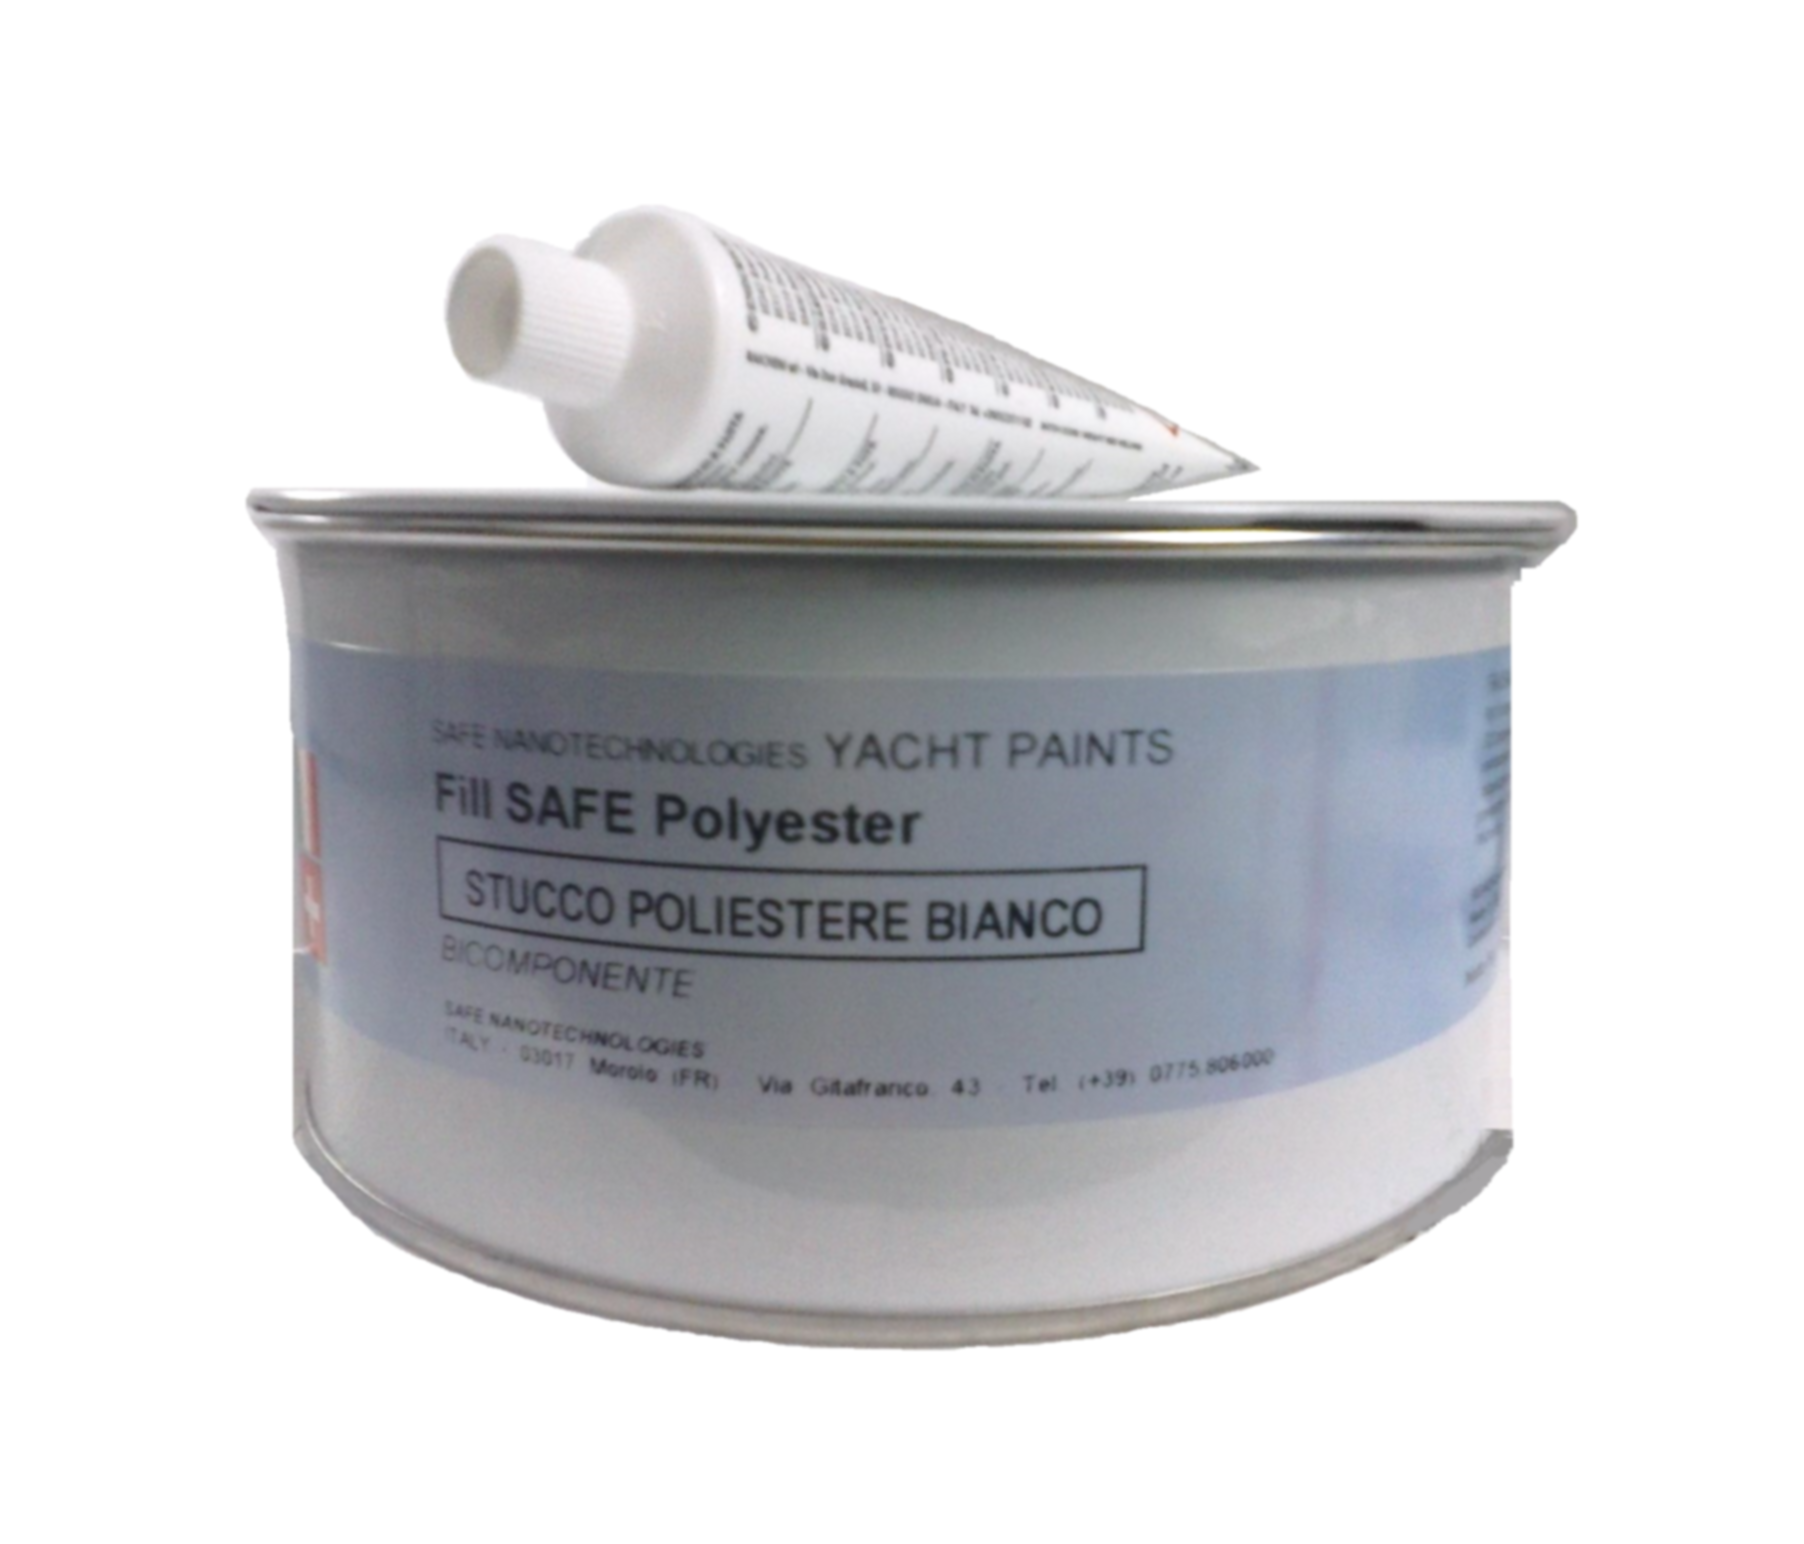 Fill safe polyester - Stucco Poliestere